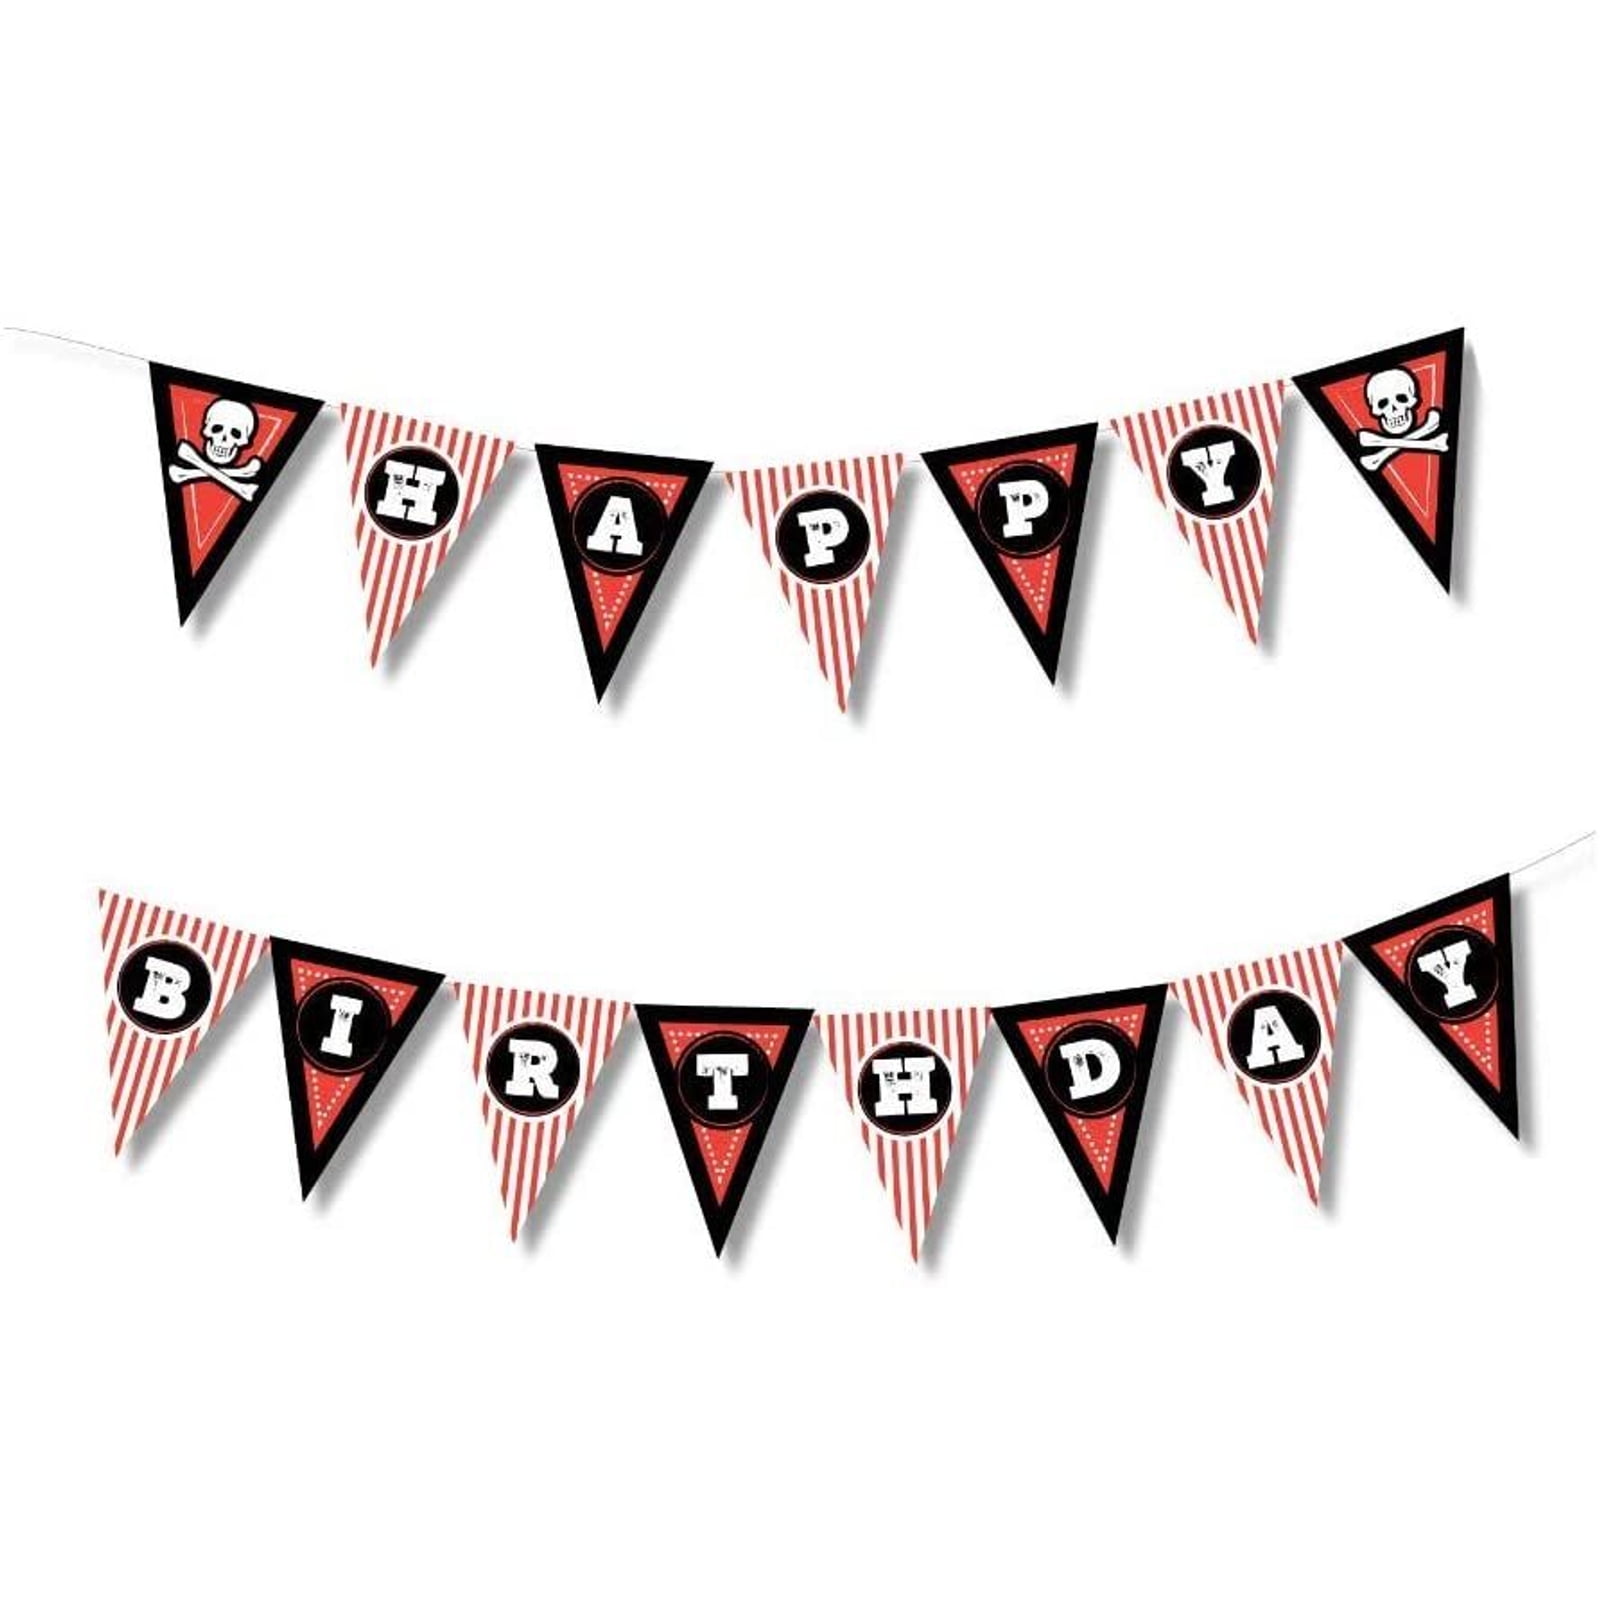 Pirates & Treasure Personalized Children's Birthday Party Bunting Flag Banner 